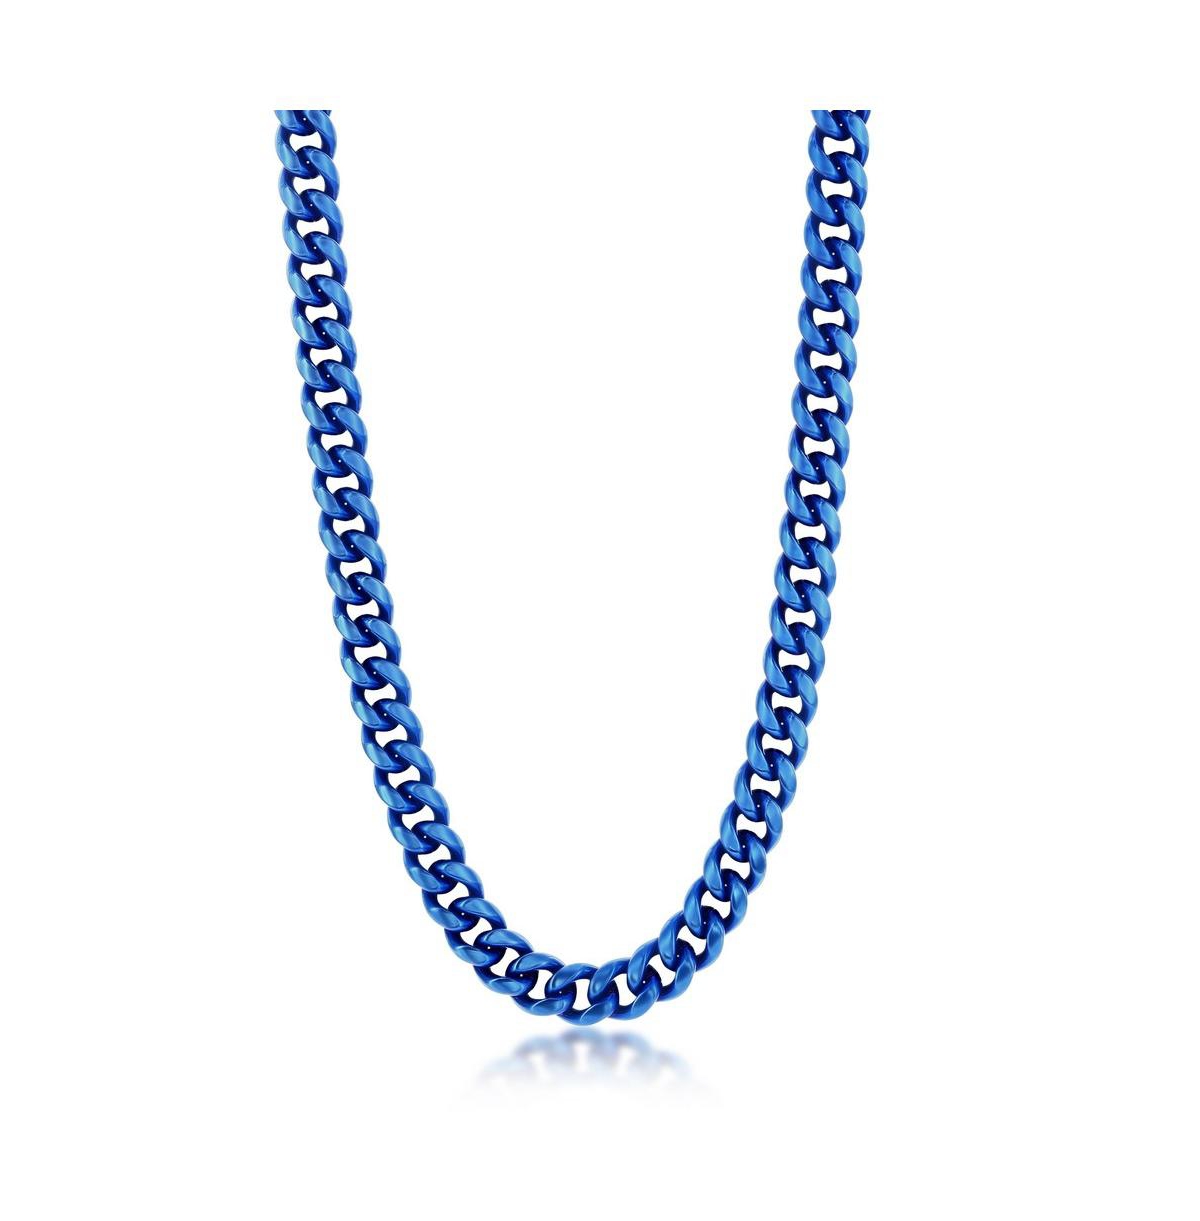 Stainless Steel 10mm Miami Cuban Chain Necklace - Blue